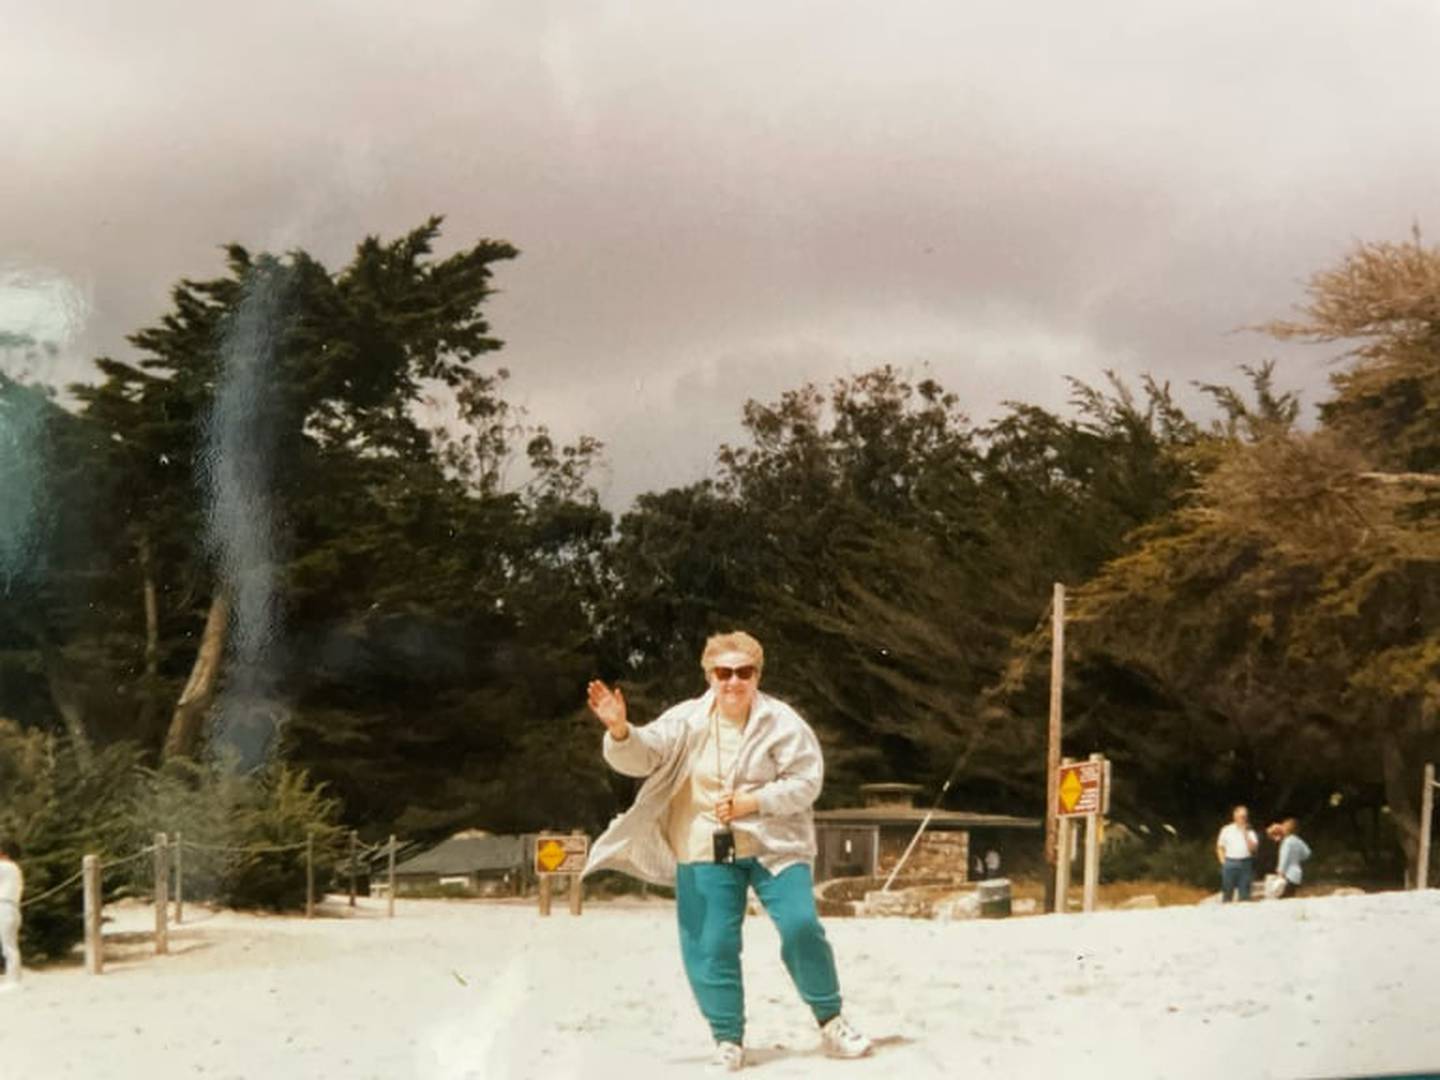 Former Wilmington resident Carol Juricic is seen at a beach in California in 1996. Carol and her husband Paul cared for more than 250 foster children over 25 years. They also adopted four children.